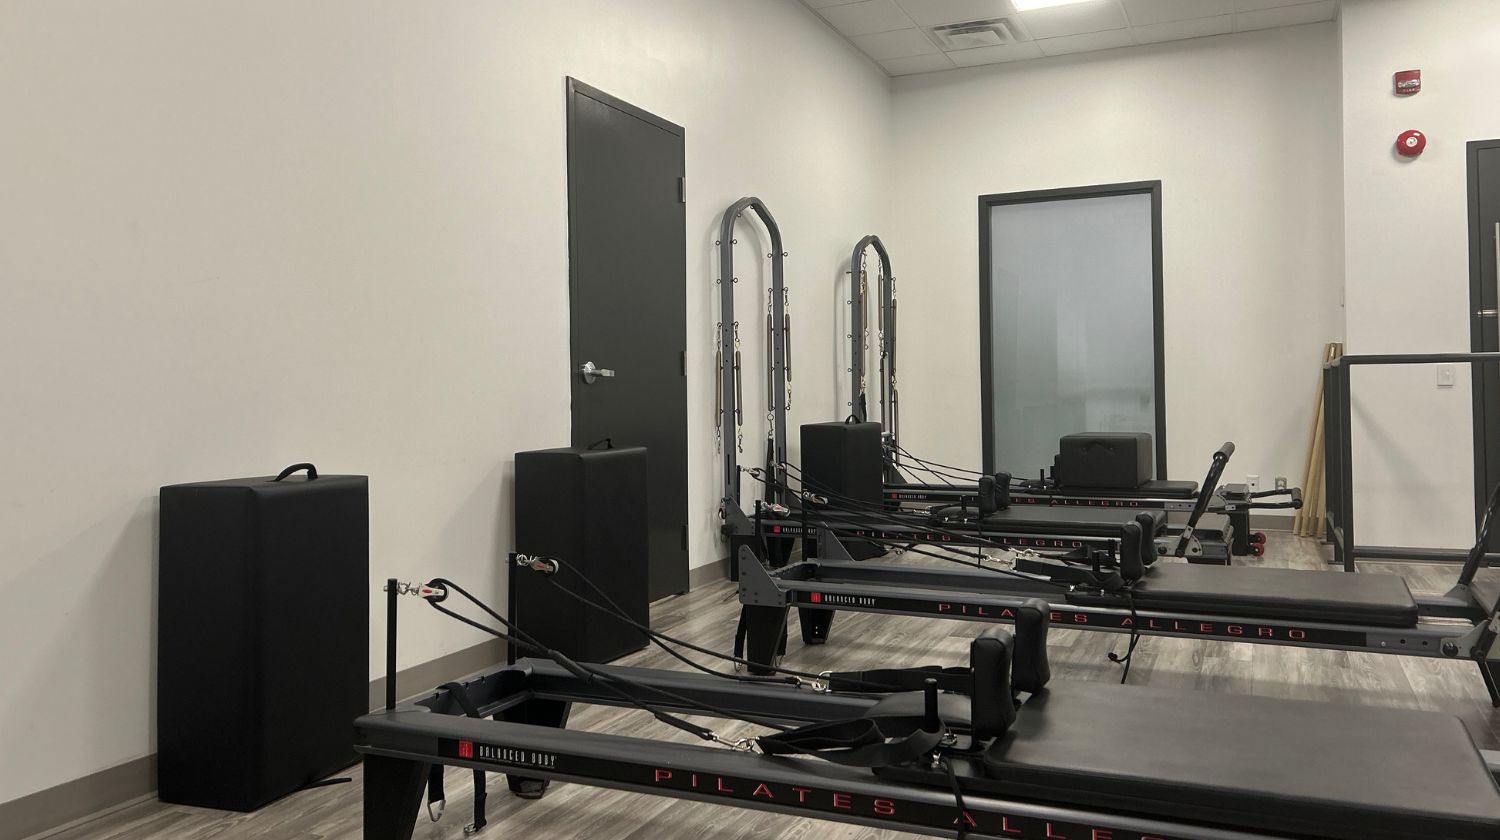 Image of our Pilates Reformer studio at our Mayfair Lakeshore location. There are three Pilates reformer machines in the image